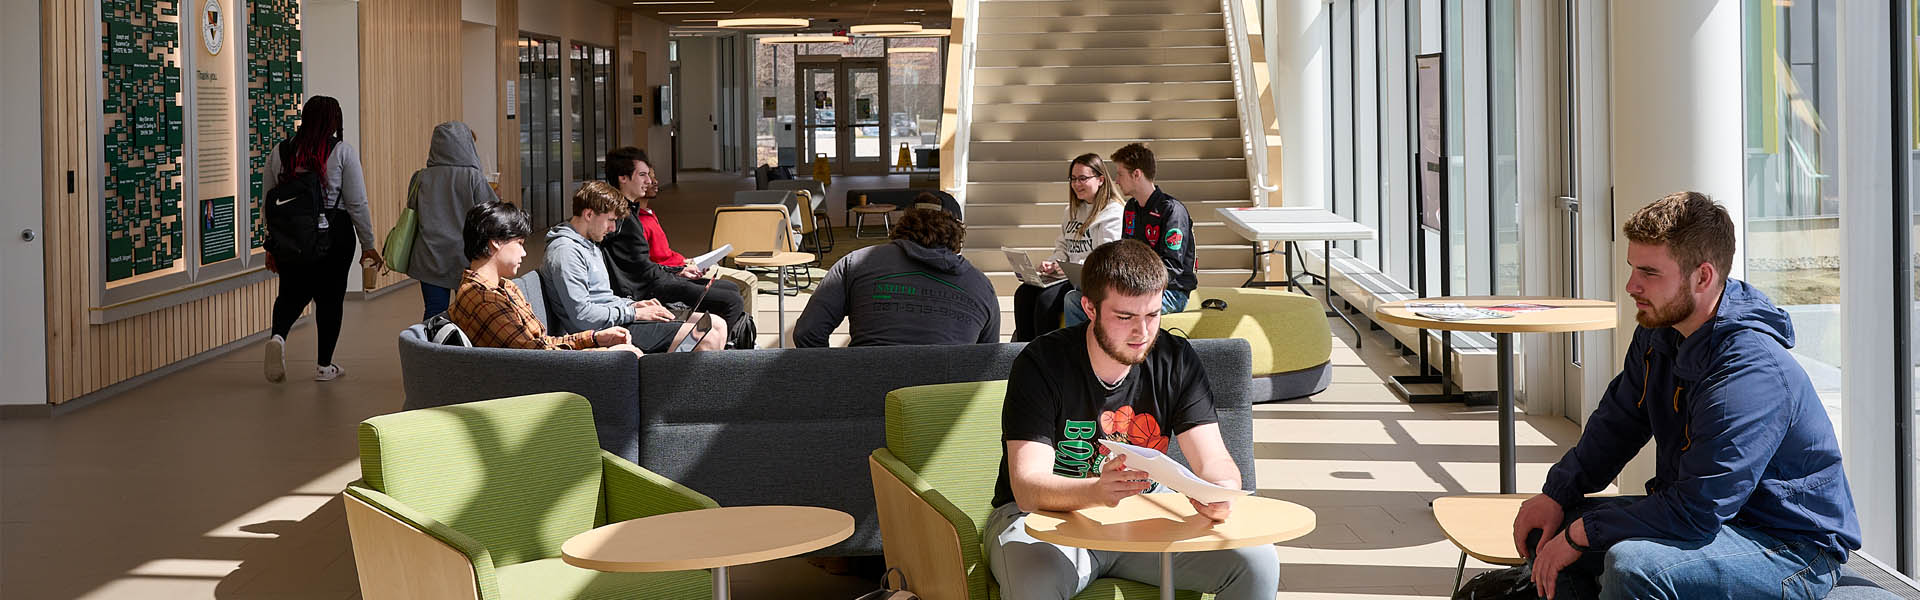 Students studying inside the Harold Alfond Hall